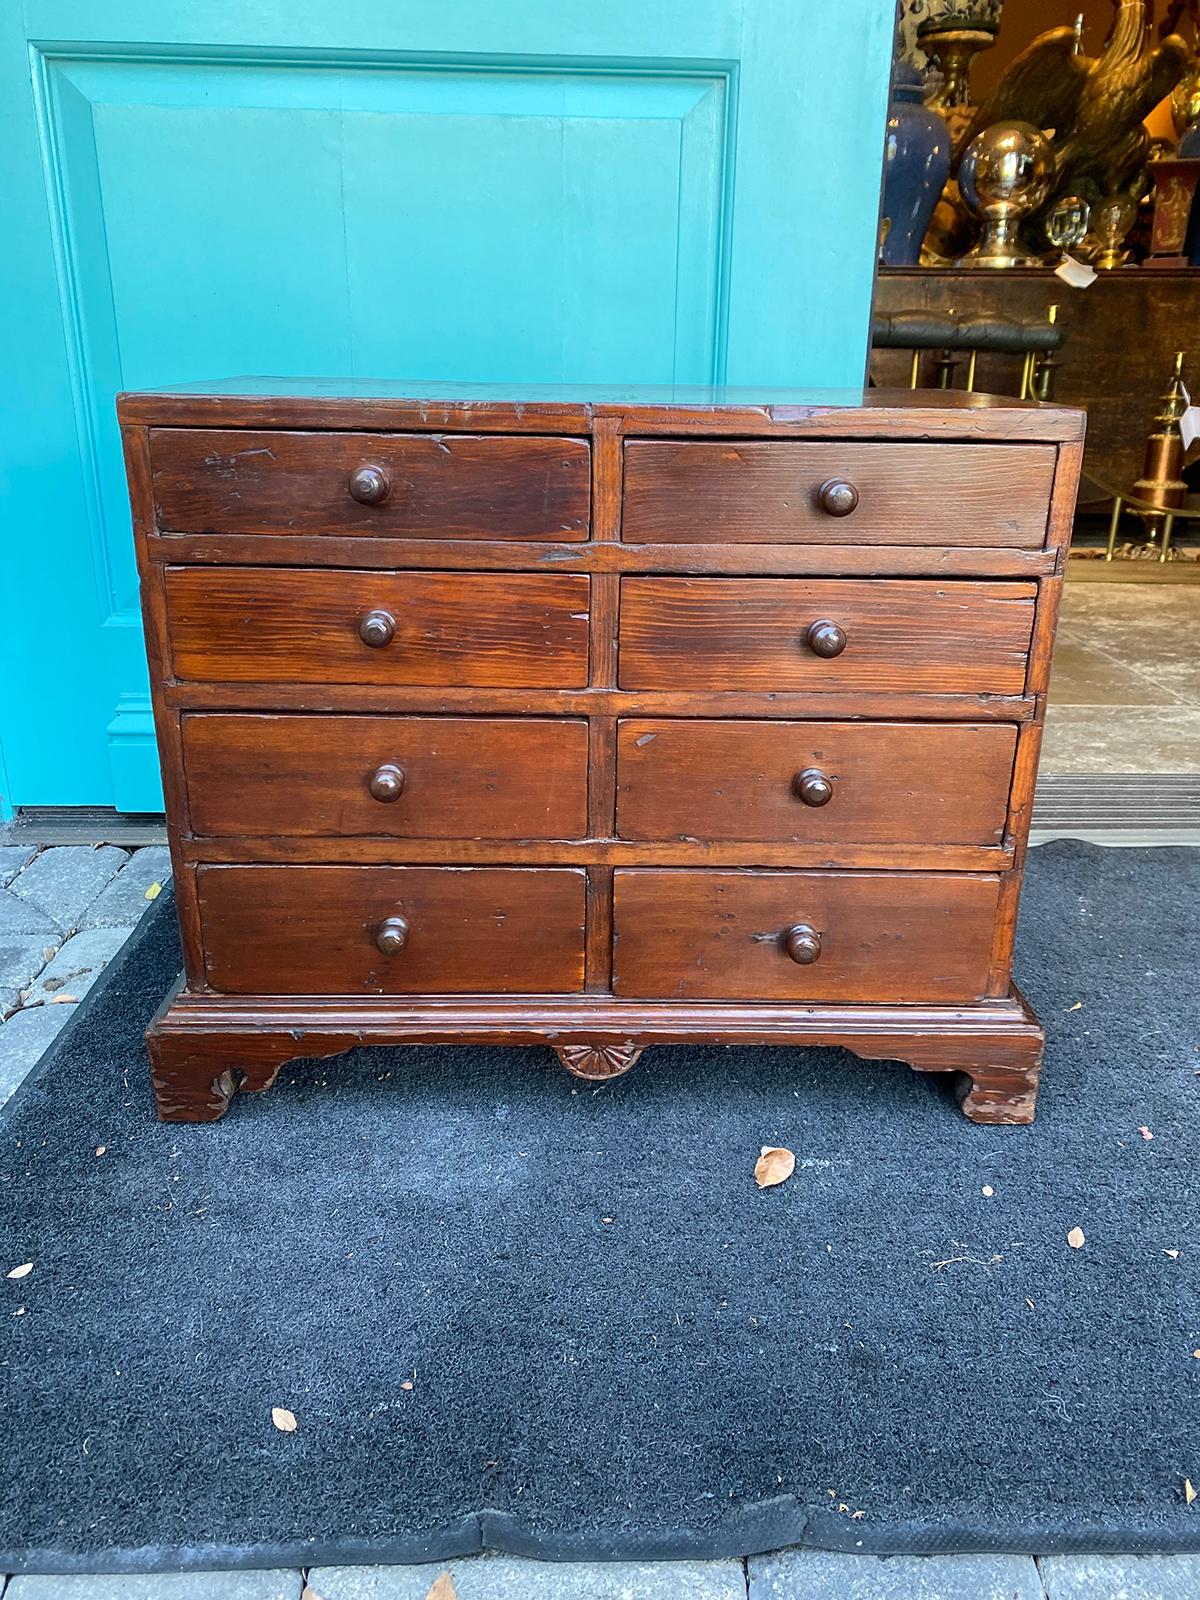 18th-19th century American pine miniature chest with eight drawers.